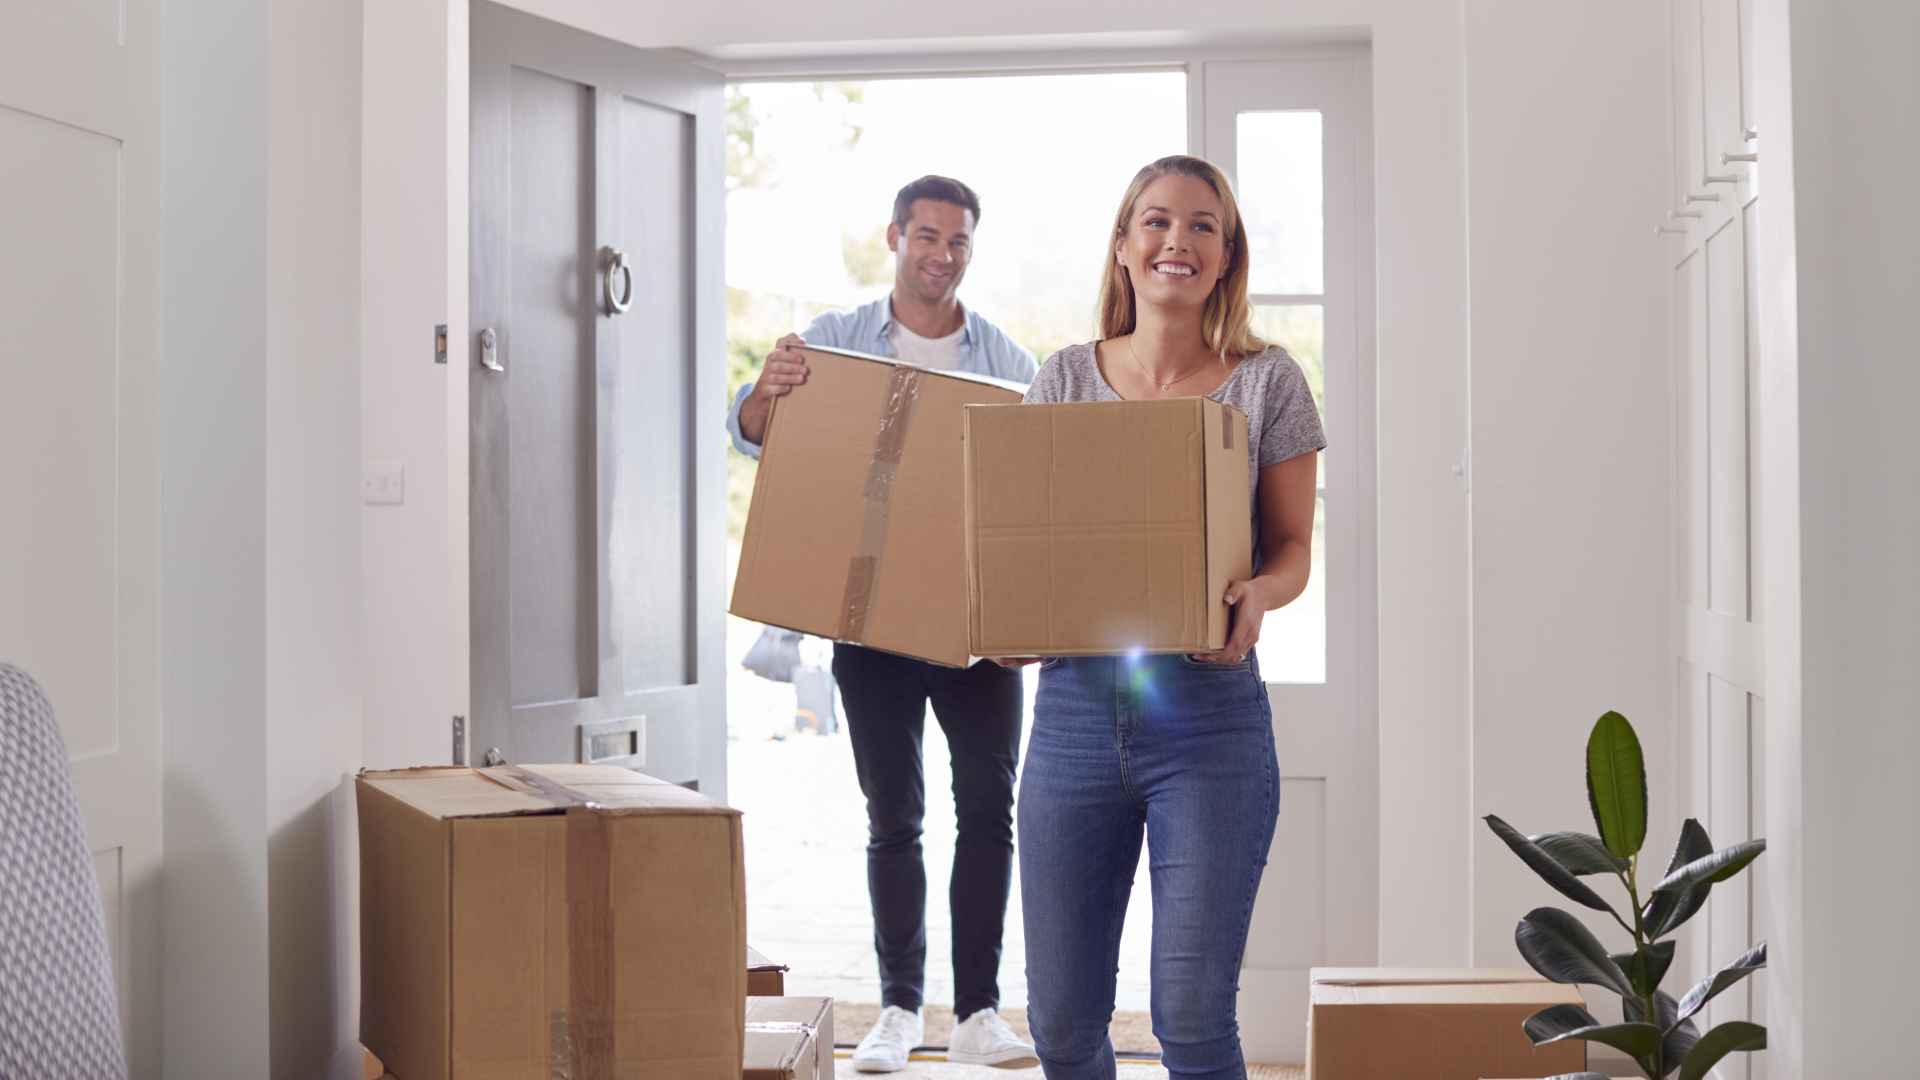 Excited Couple Carrying Boxes Through Front Door Of New Home On Moving Day